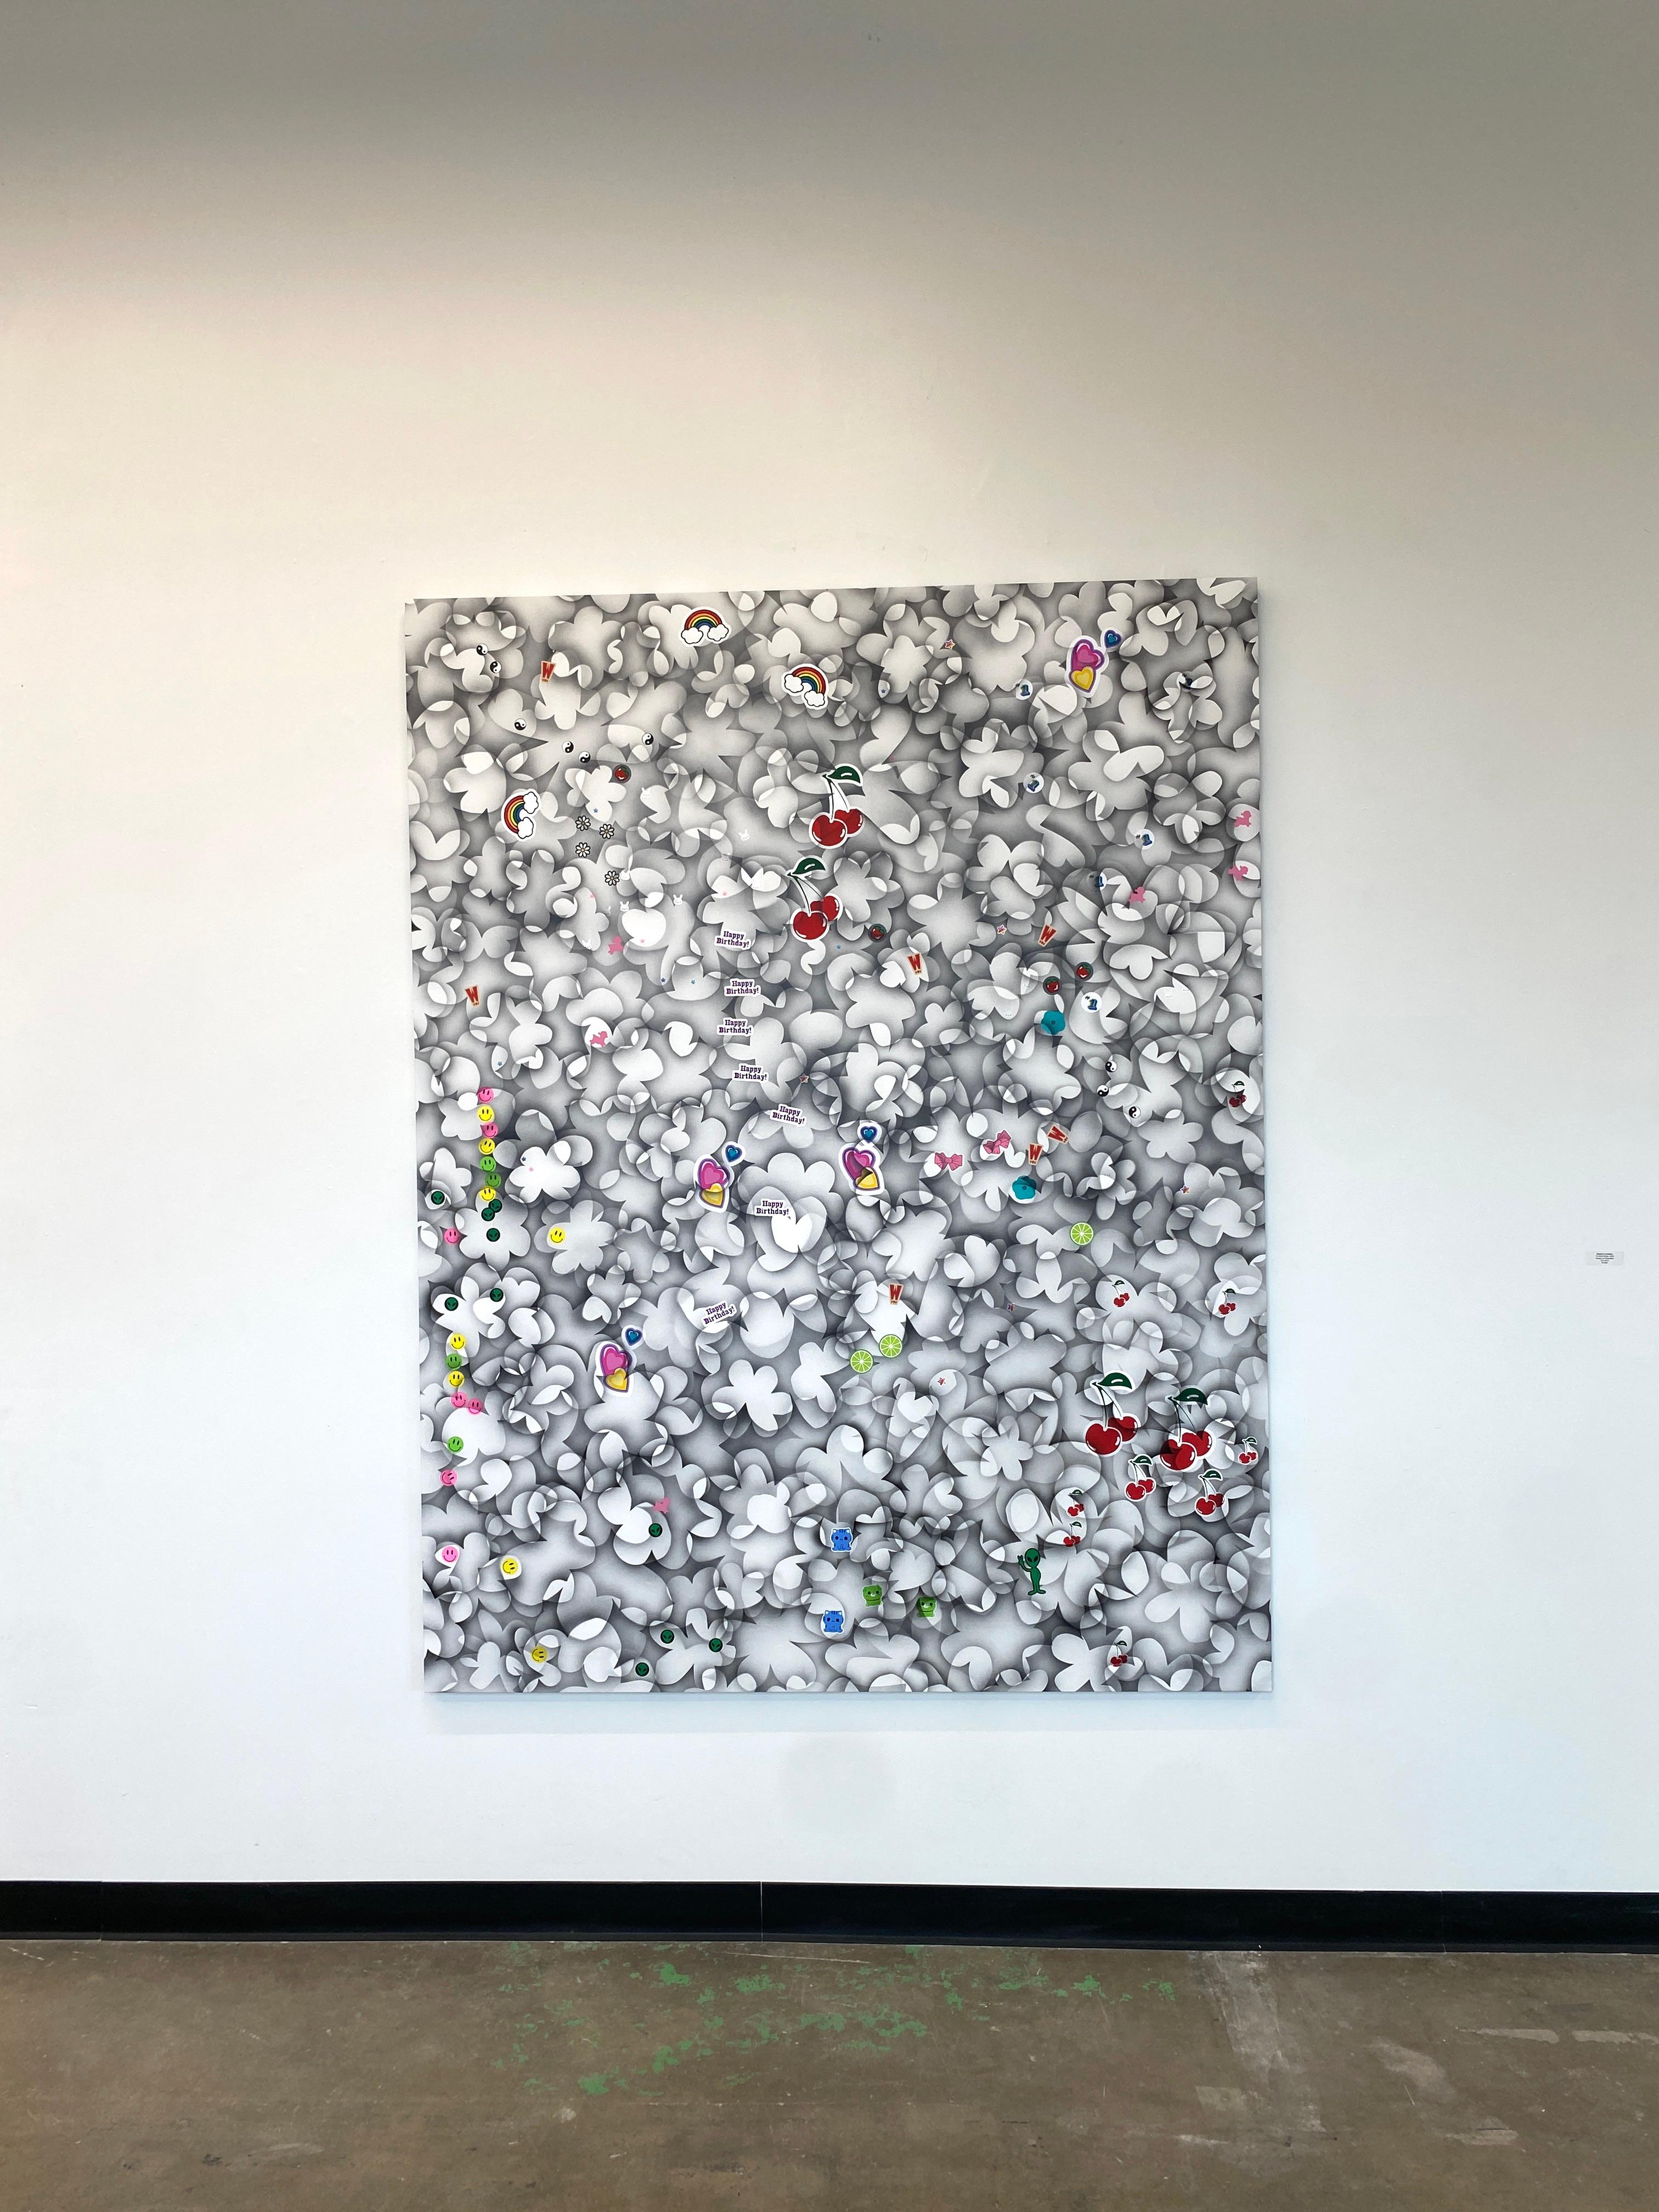 *On view at Ivester Contemporary through May 27th* 

In this newest body of paintings and prints, Fort Worth based artist Rachel Livedalen continues the exploration of femininity through the lens of art history and popular culture, but grid and